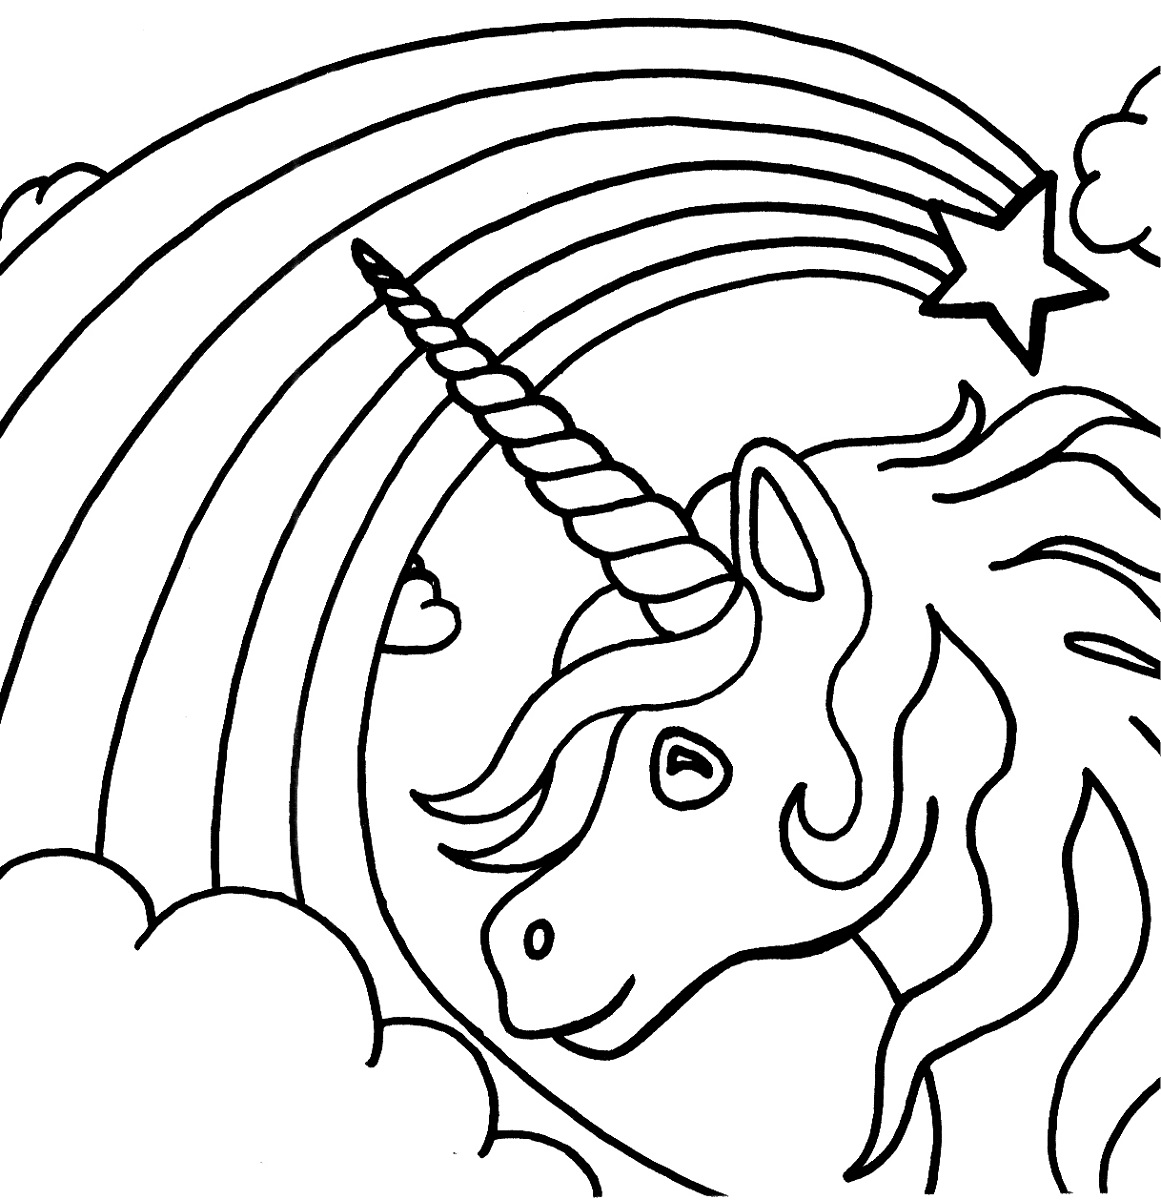 unicorn-coloring-pages-for-kids-at-getdrawings-free-download